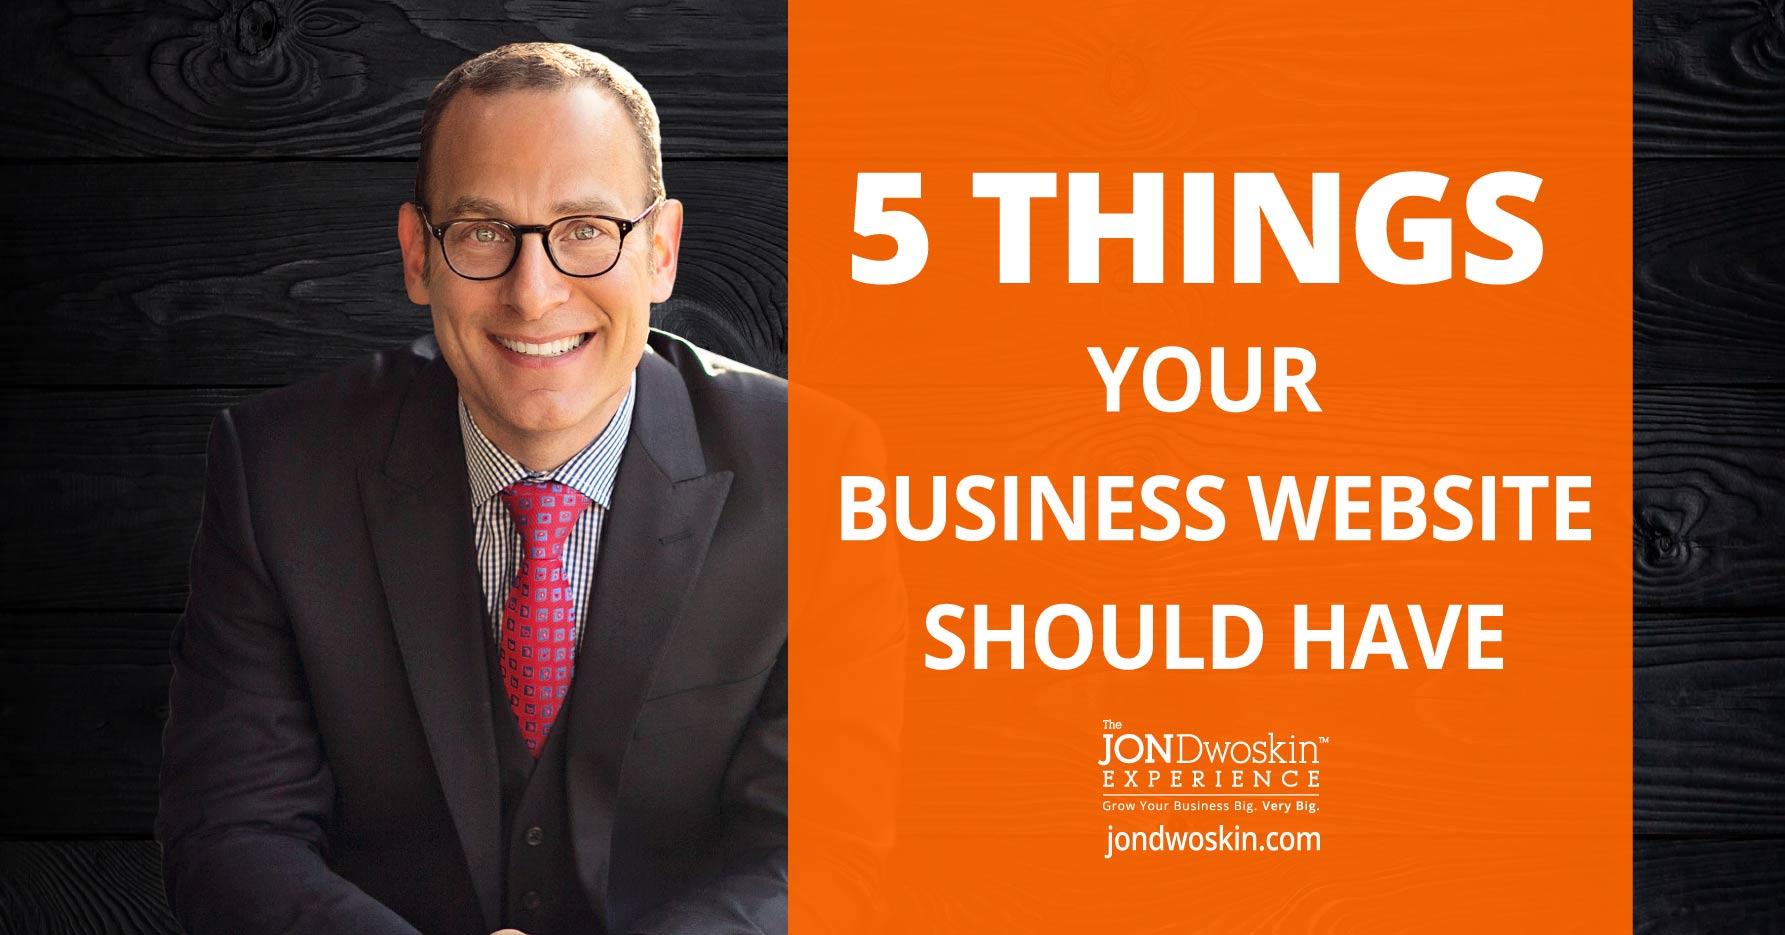 Jon-Dwoskin-Blog-5-Things-Your-Business-Website-Should-Have